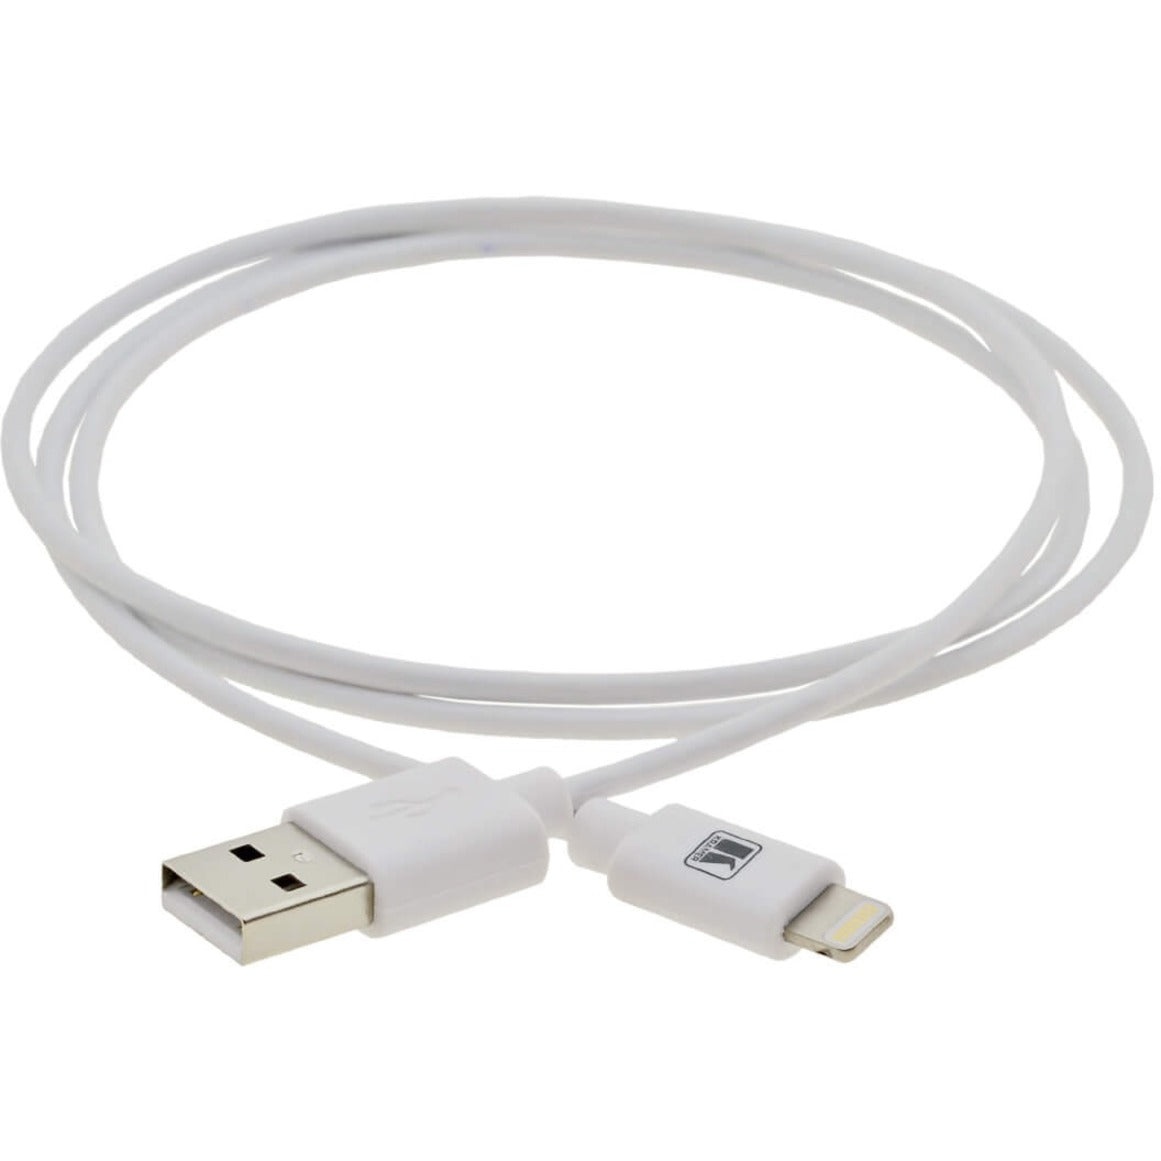 Kramer 96-0210013 Apple USB Sync & Charging Cable with Lightning Connector - White, 3ft